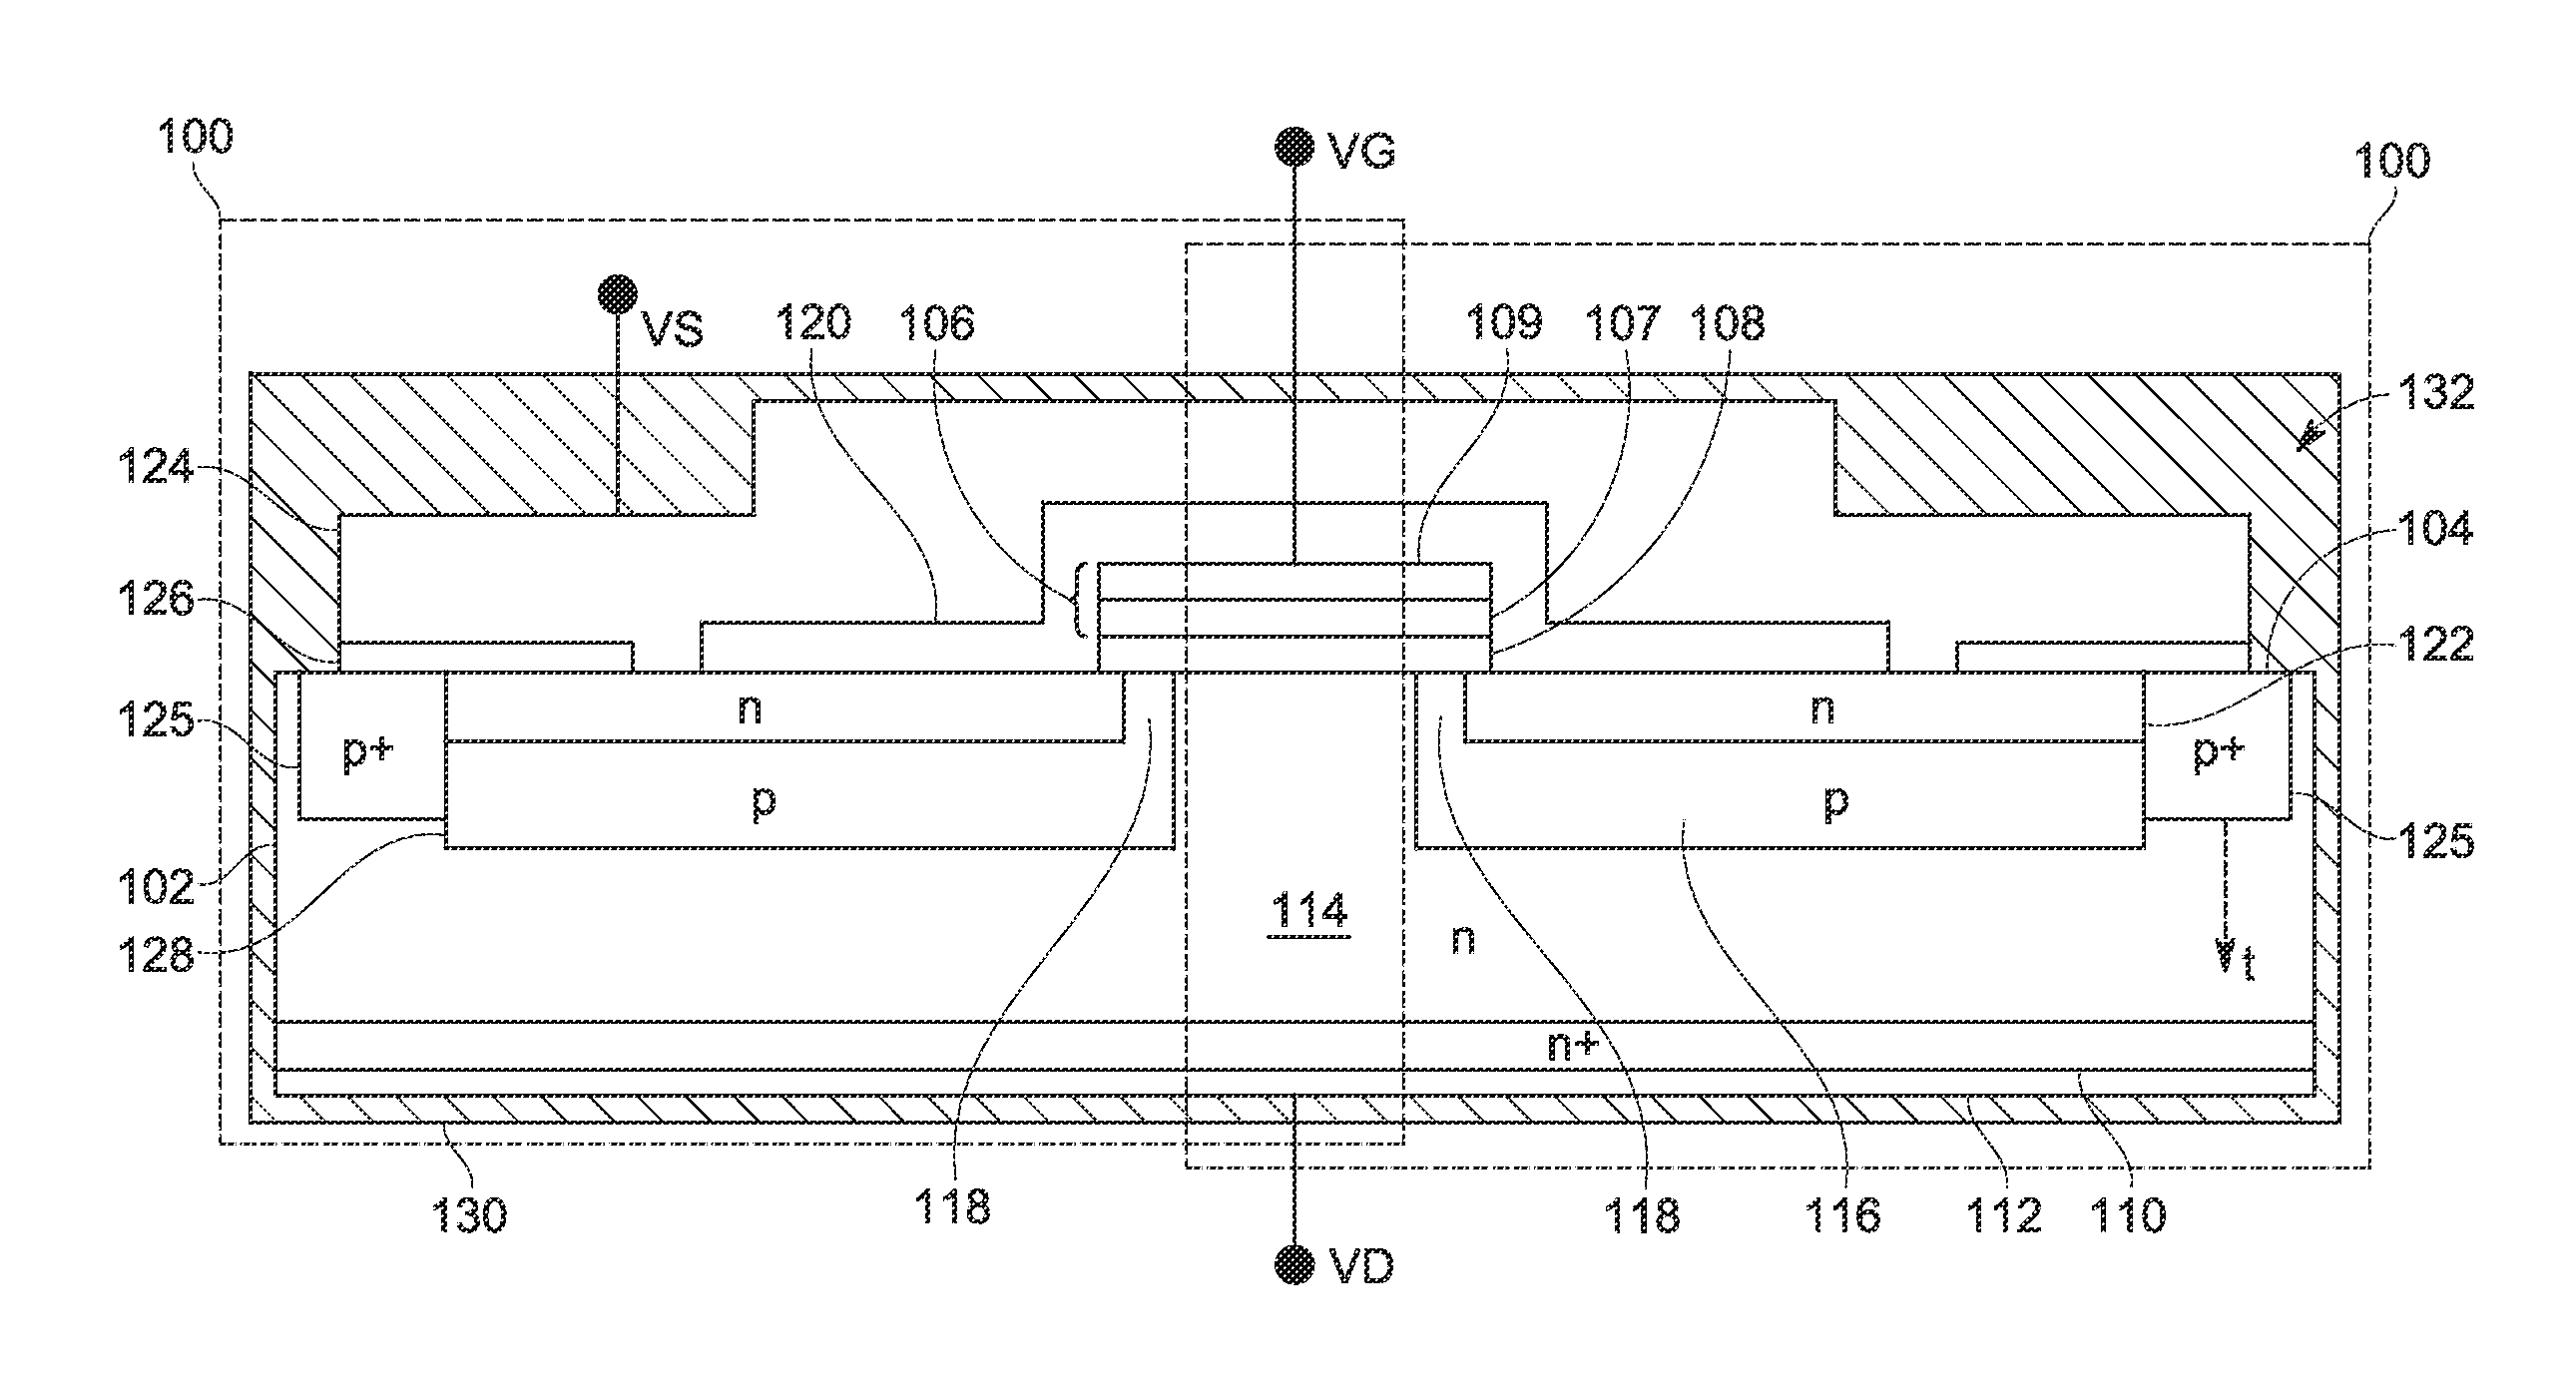 Semiconductor device and method for reduced bias temperature instability (BTI) in silicon carbide devices